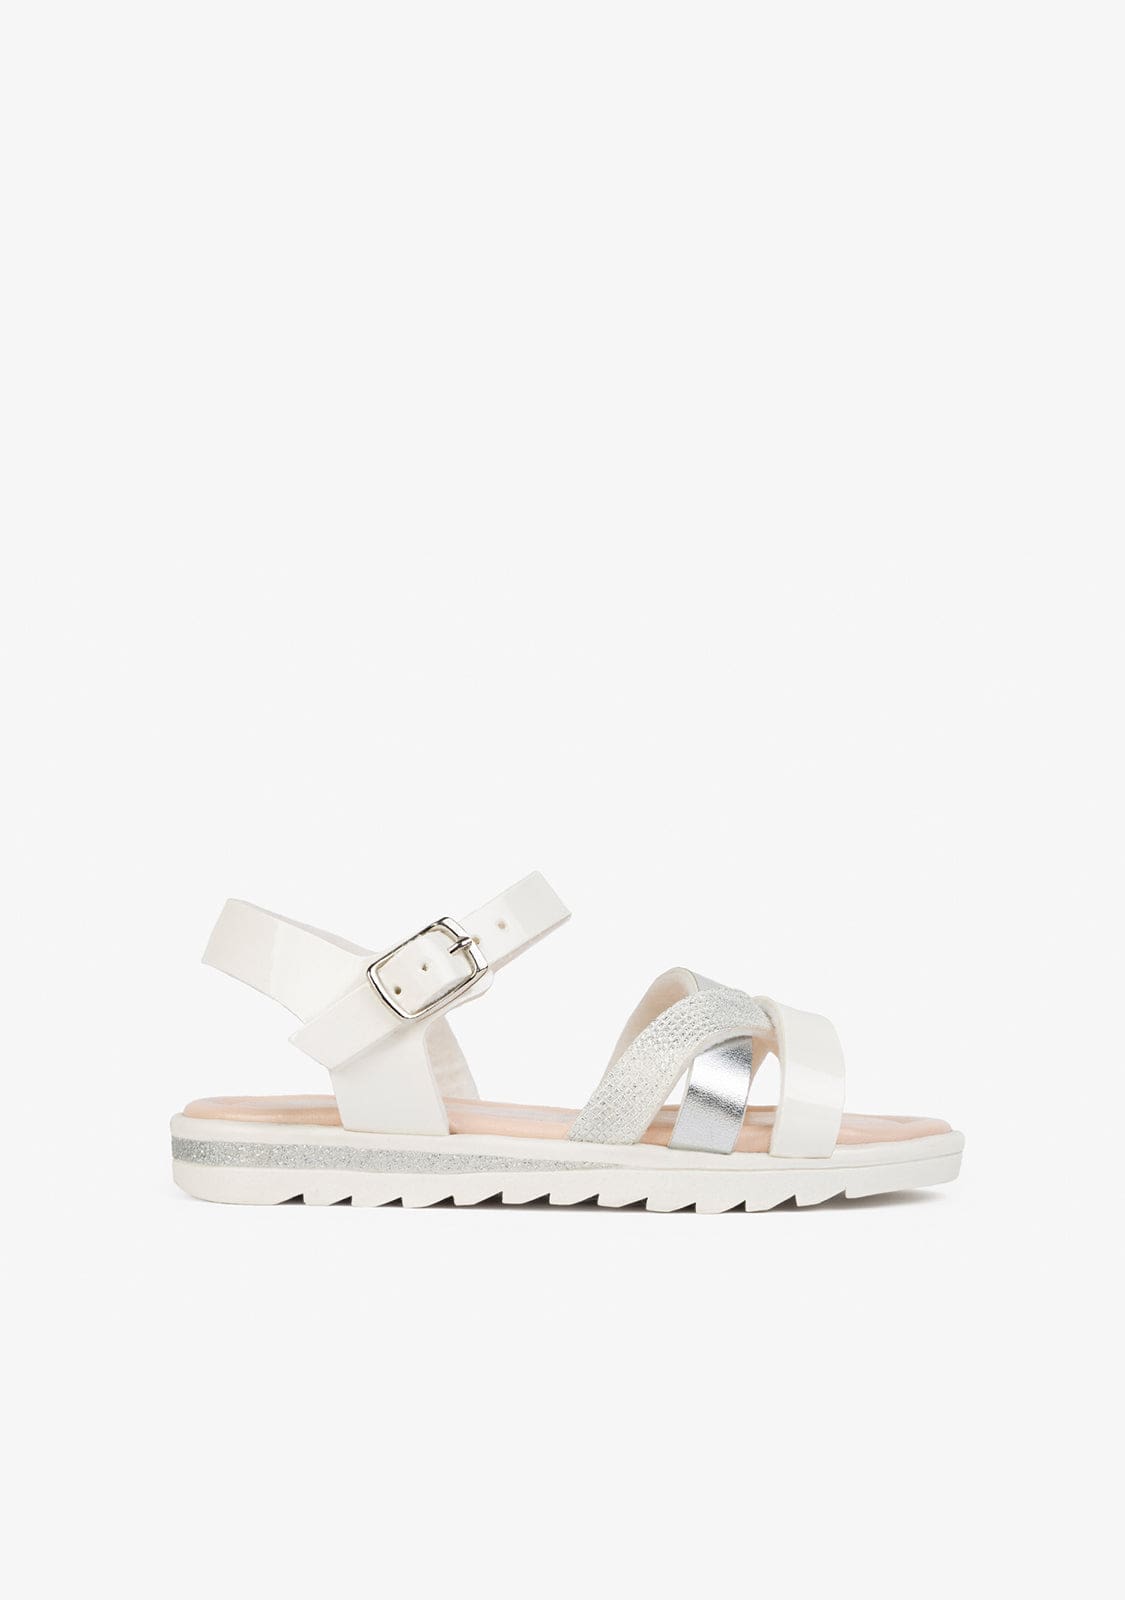 CONGUITOS Shoes Girl's White Patent Leather Sandals